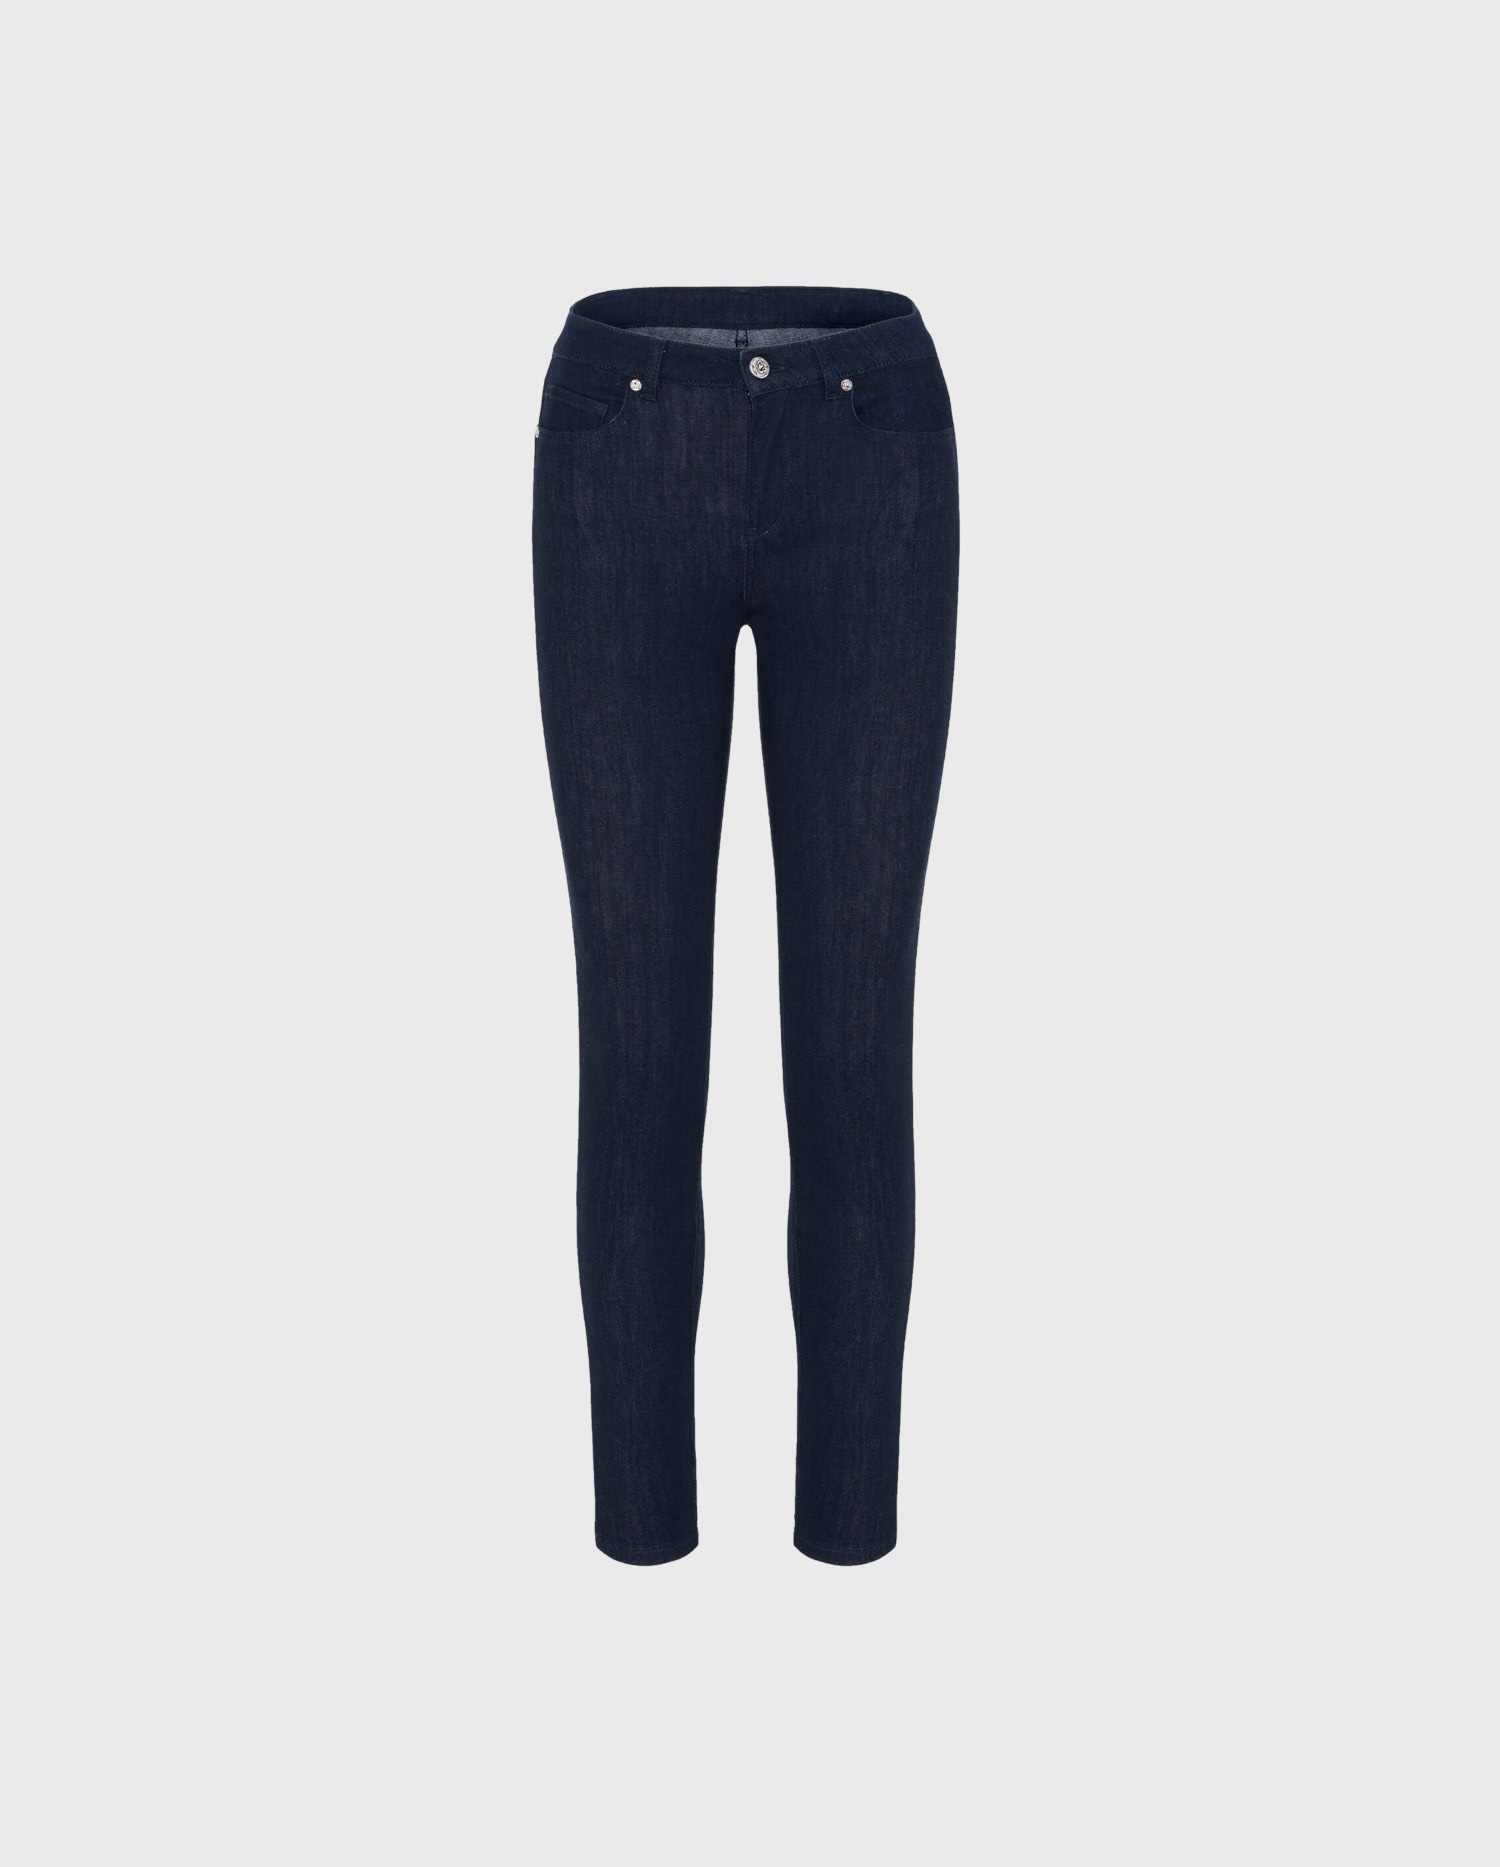 Discover The SKYE skinny denim jeans in dark wash from ANNE FONTAINE